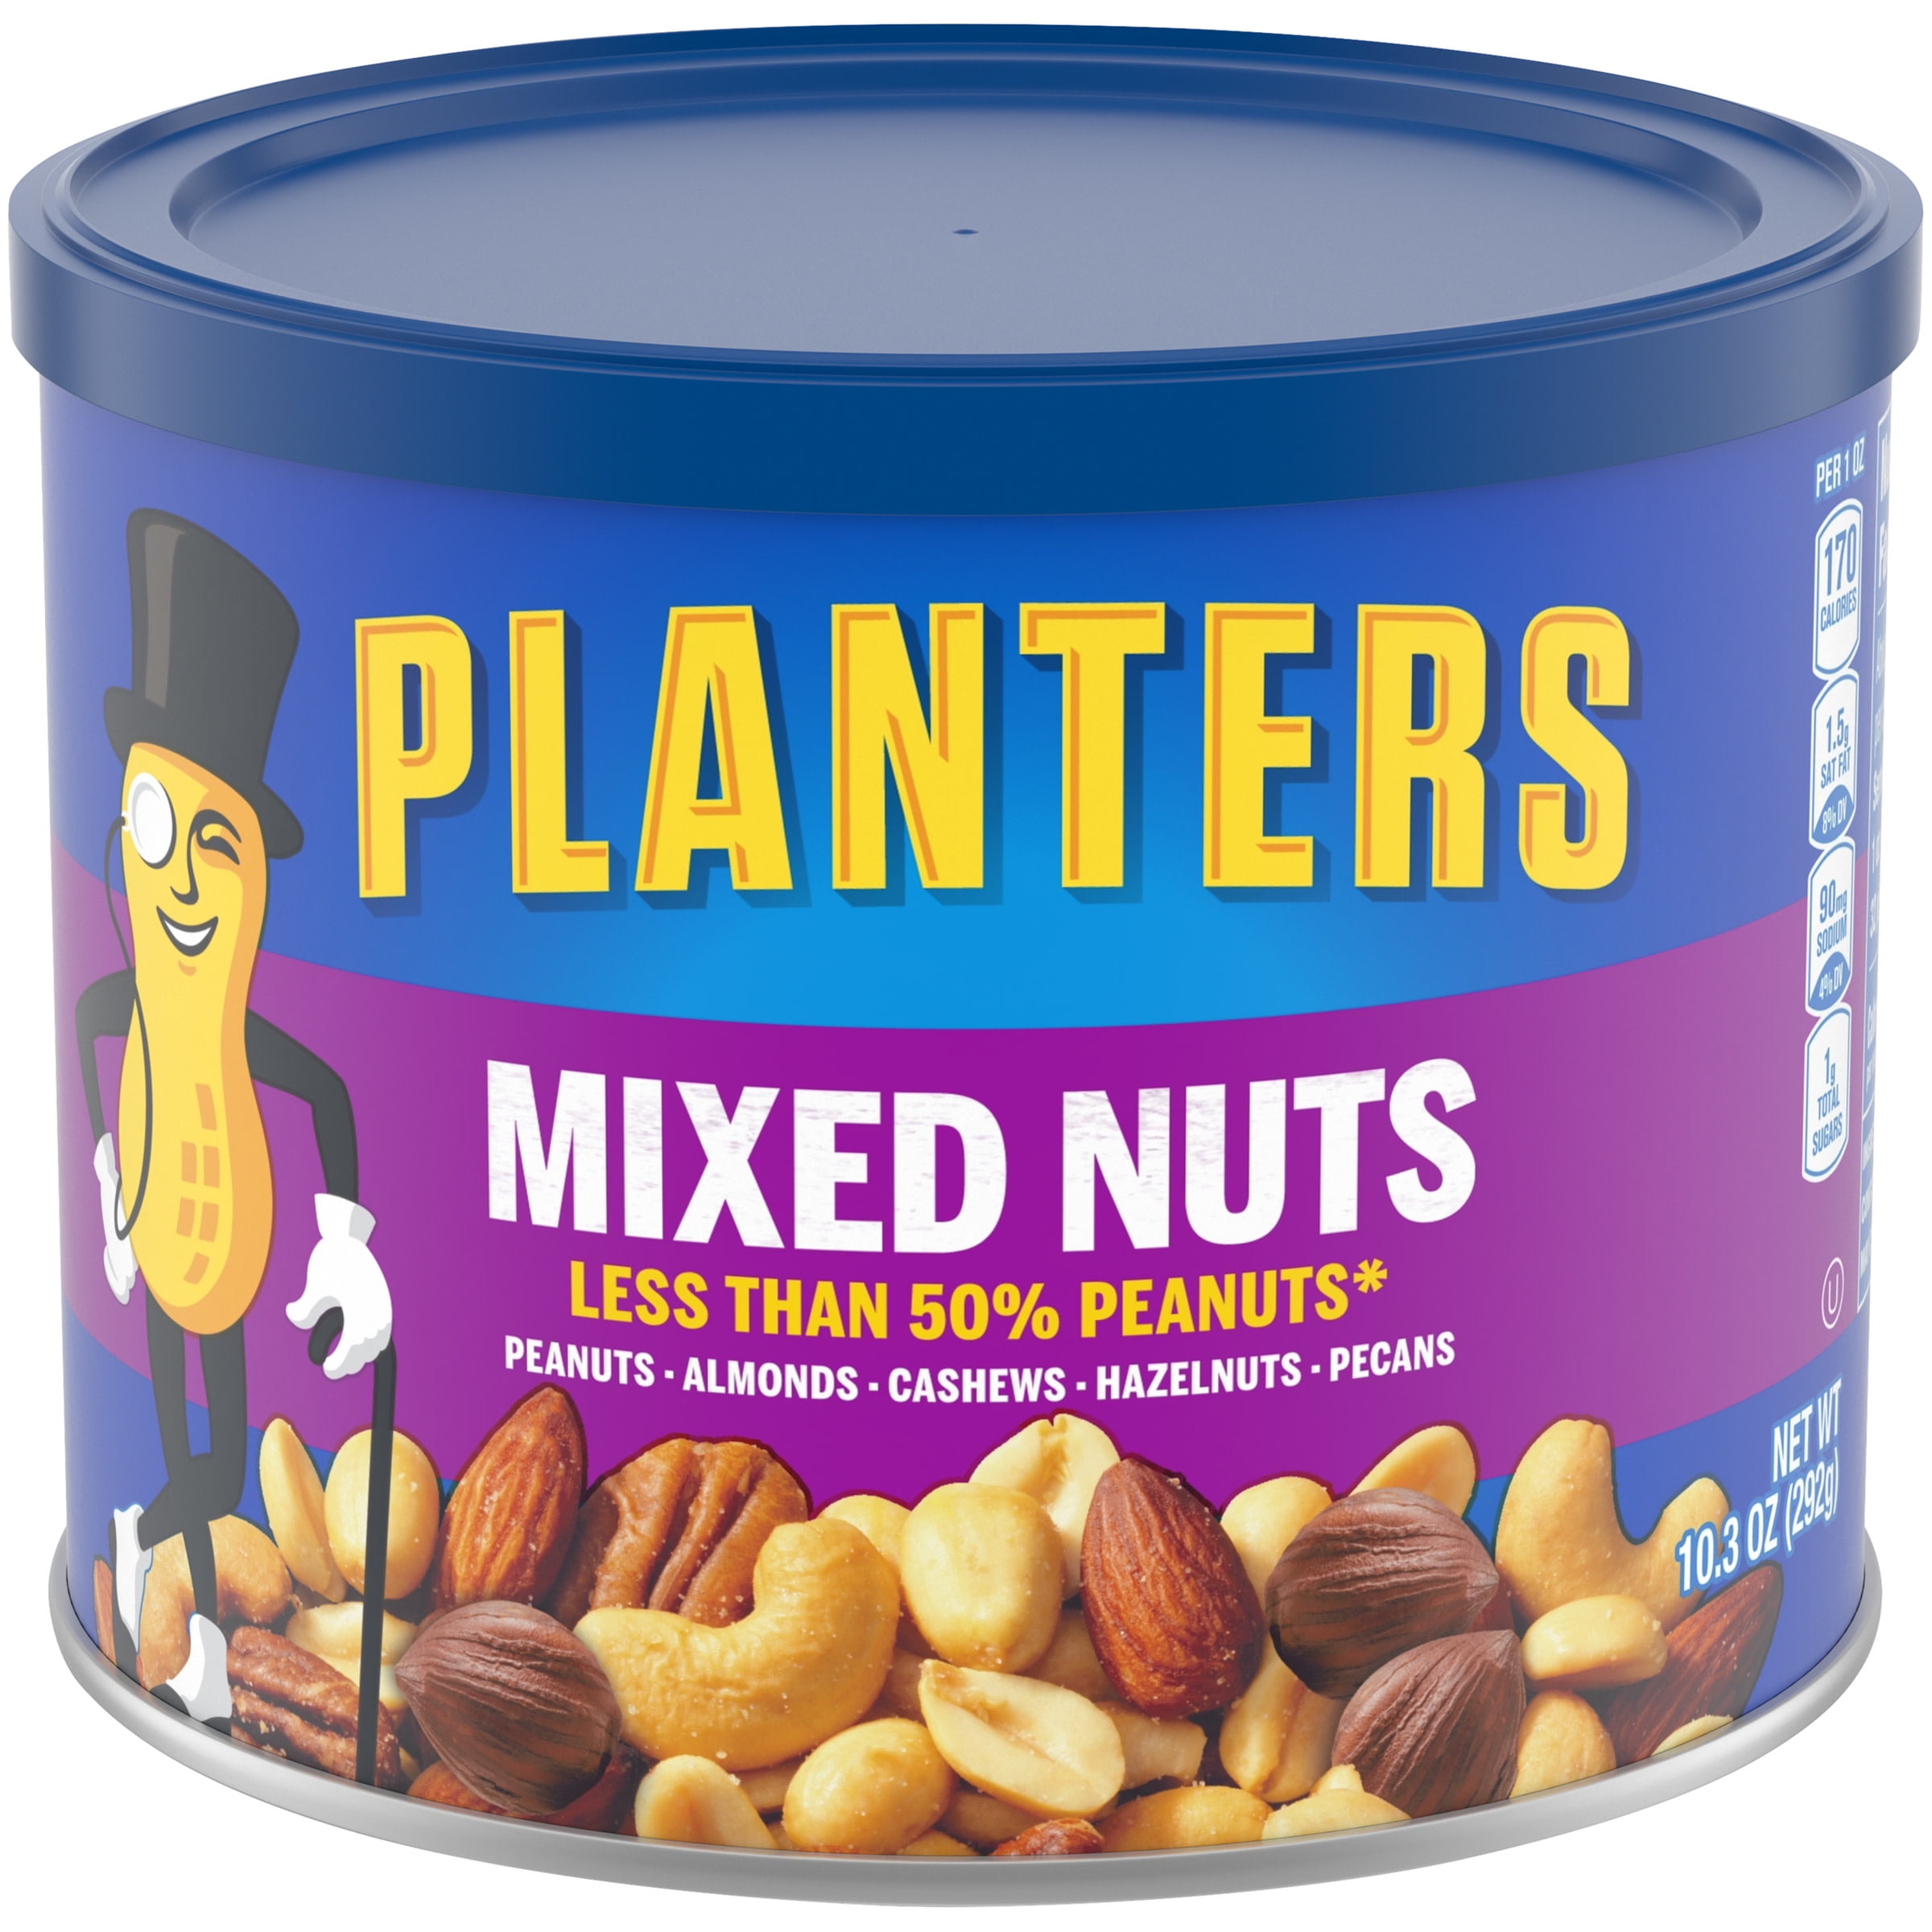 Buy Planters Mixed Nuts Less Than 50 Peanuts with Peanuts, Almonds